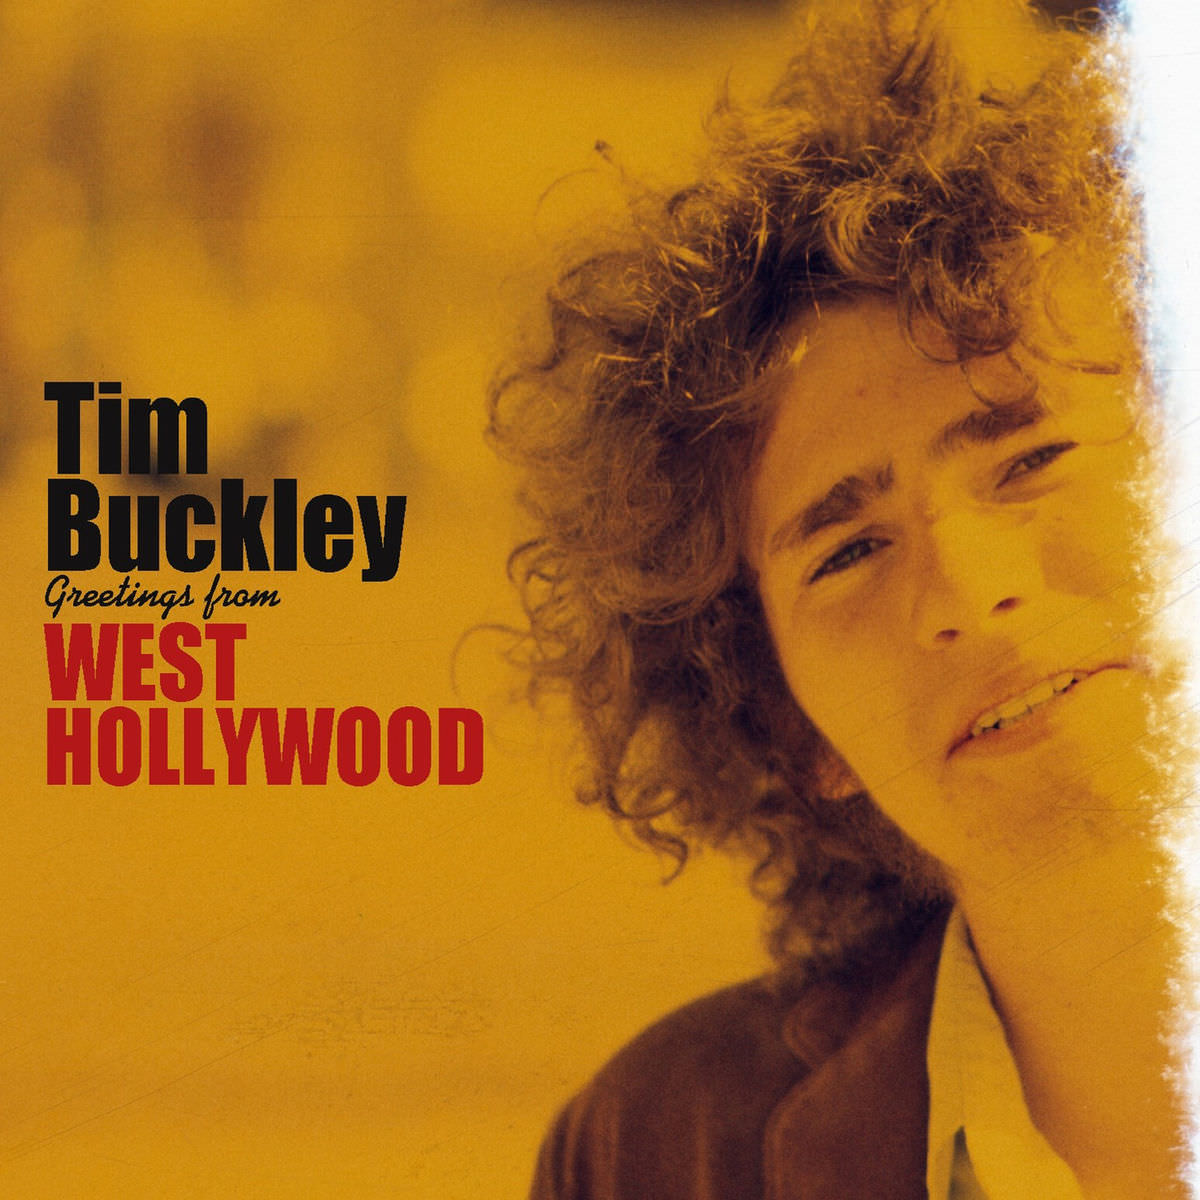 Tim Buckley – Greetings from West Hollywood (Remastered) (2017) [Qobuz FLAC 24bit/96kHz]